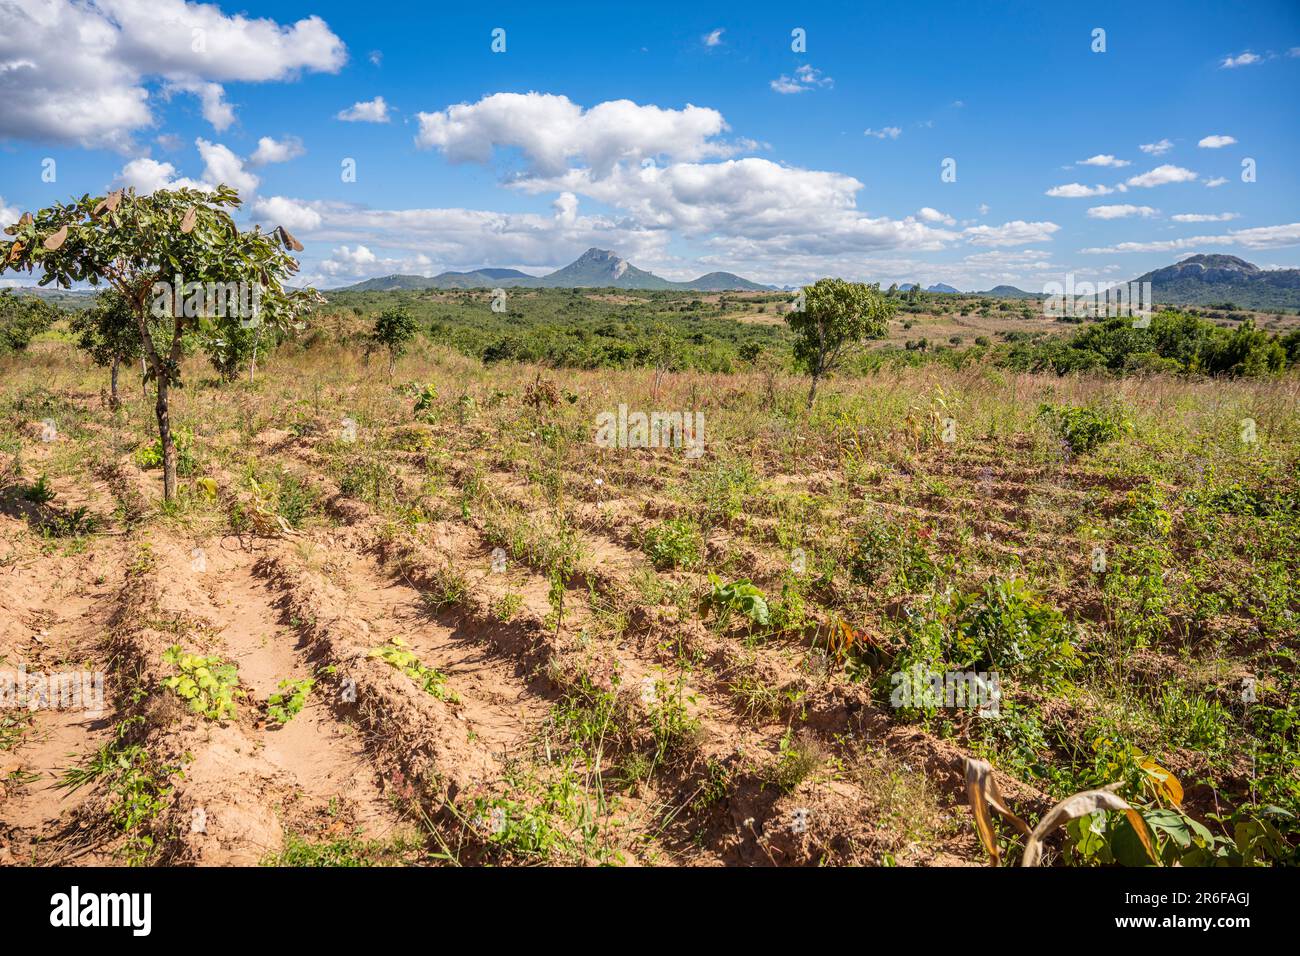 Traditional ridge and furrow cultivation on a farm in rural Malawi Stock Photo